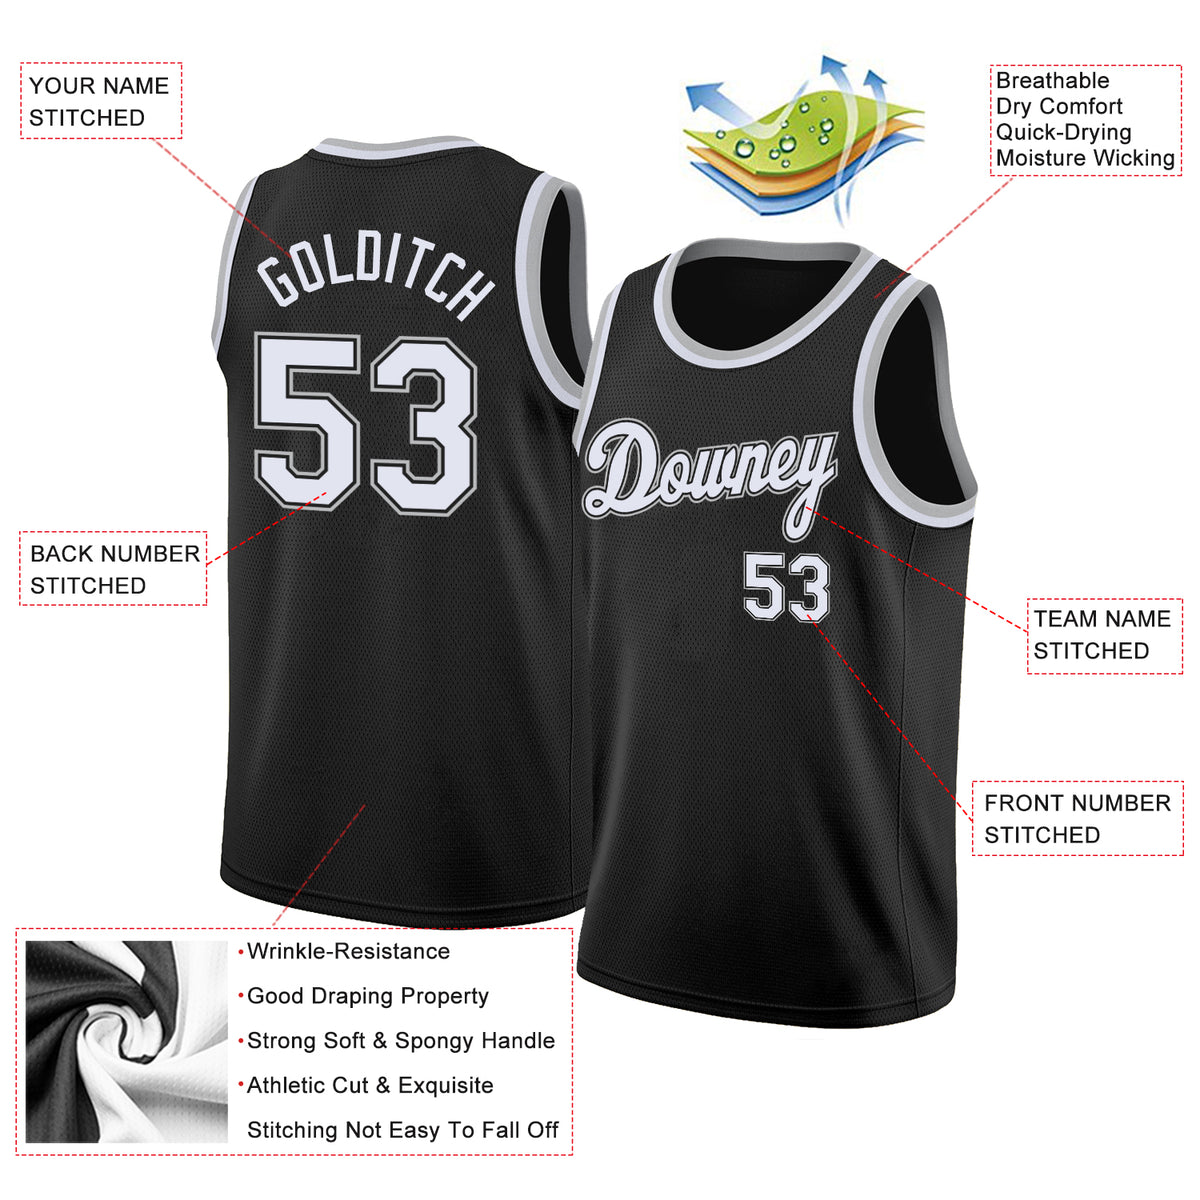 FIITG Custom Basketball Jersey Black White-Silver Gray Authentic Throwback Men's Size:L